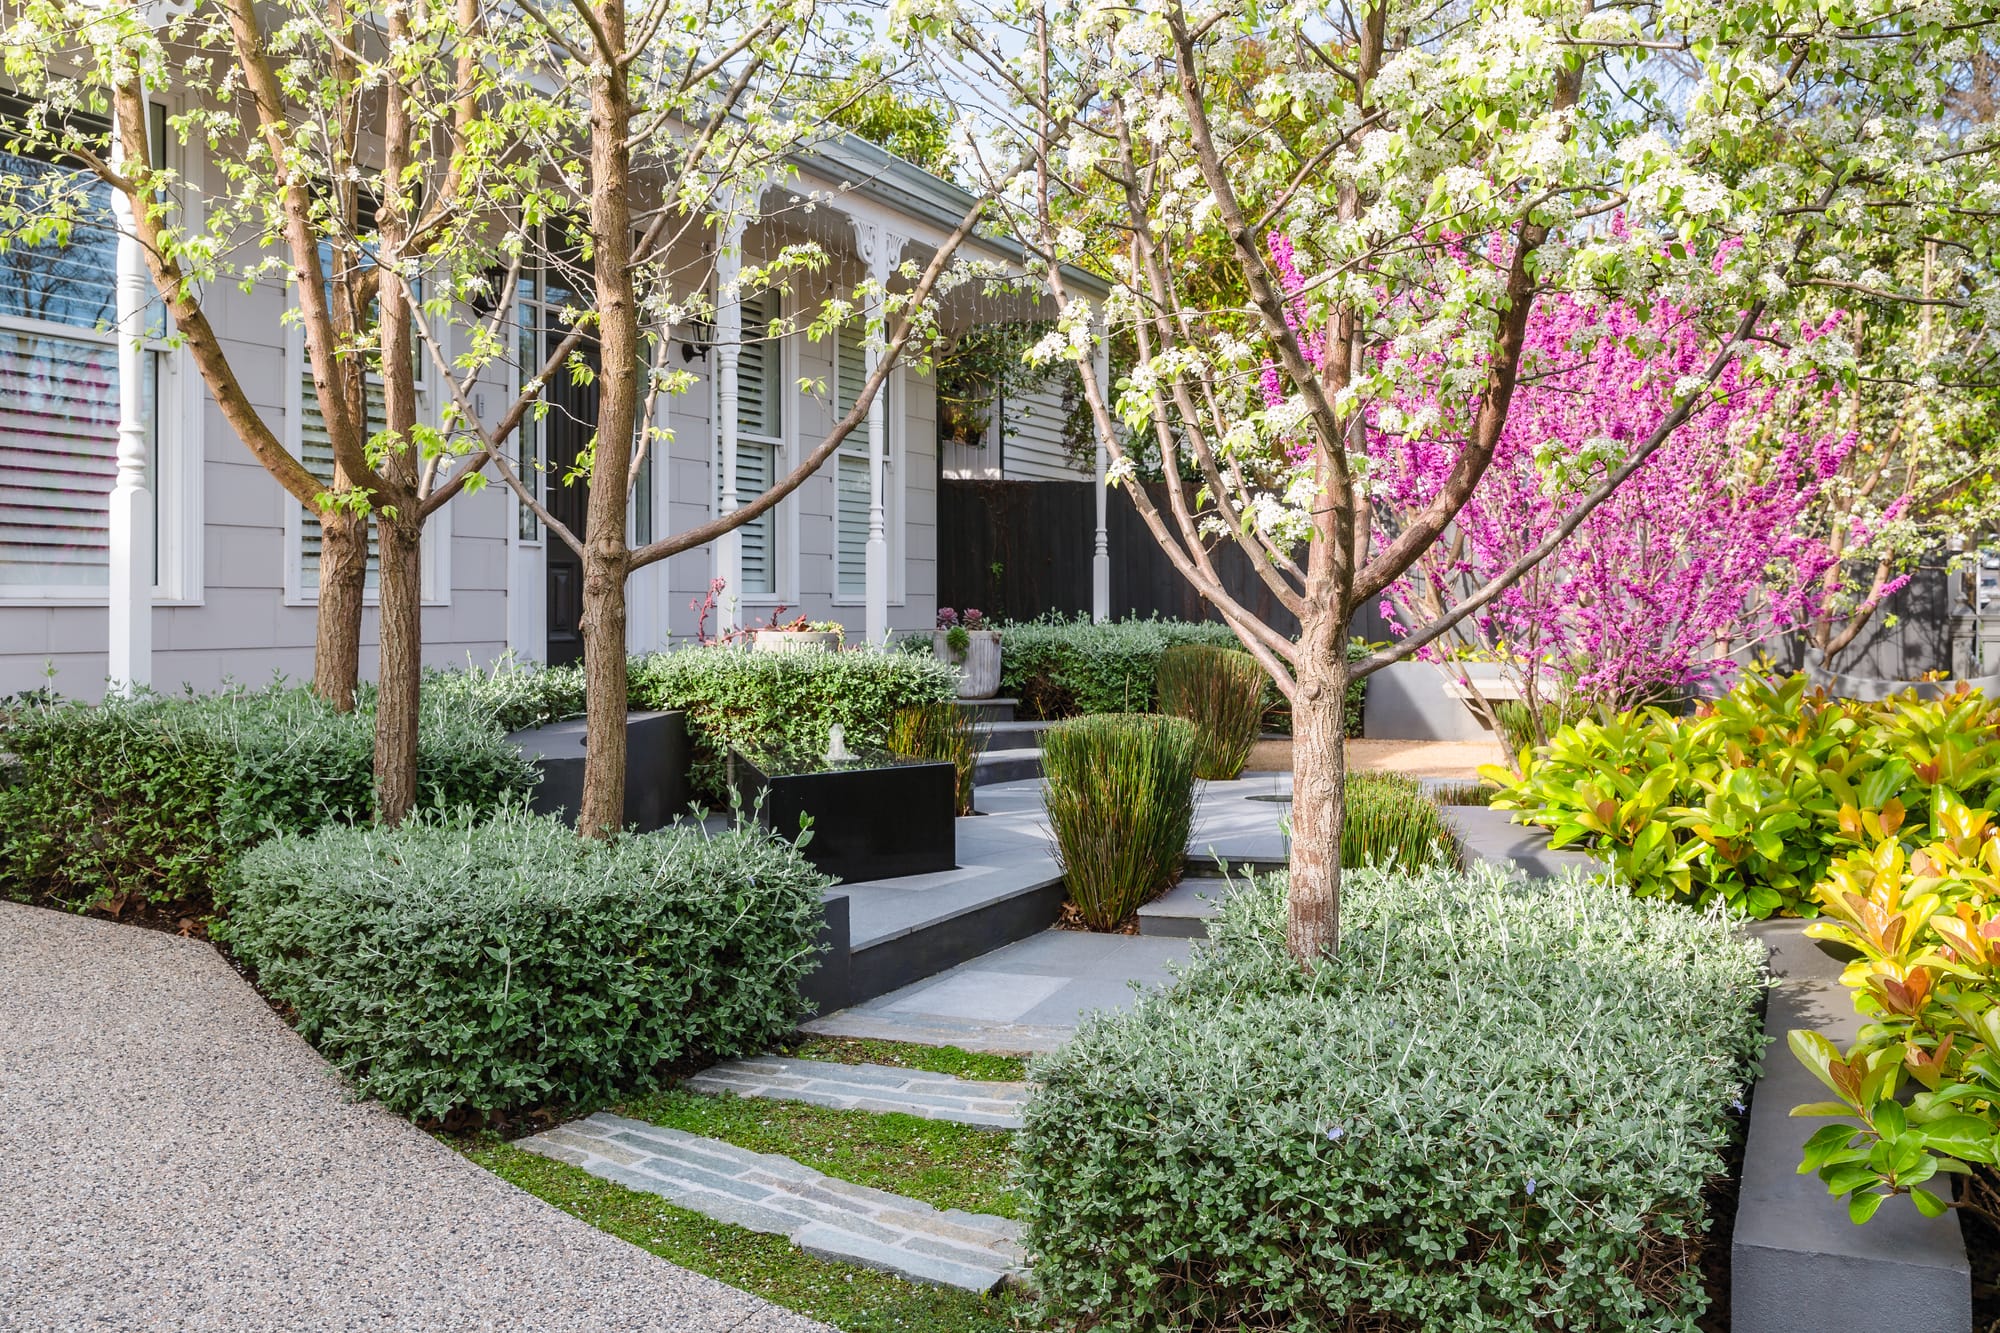  Sir Garnet Surrey Hills by Julie Crowe Landscape Design. Photography by Erik Holt Photography. Multi-level front garden. Steps leading to front porch of Victorian-era home. Trees with white and pink flowers scattered across garden levels.